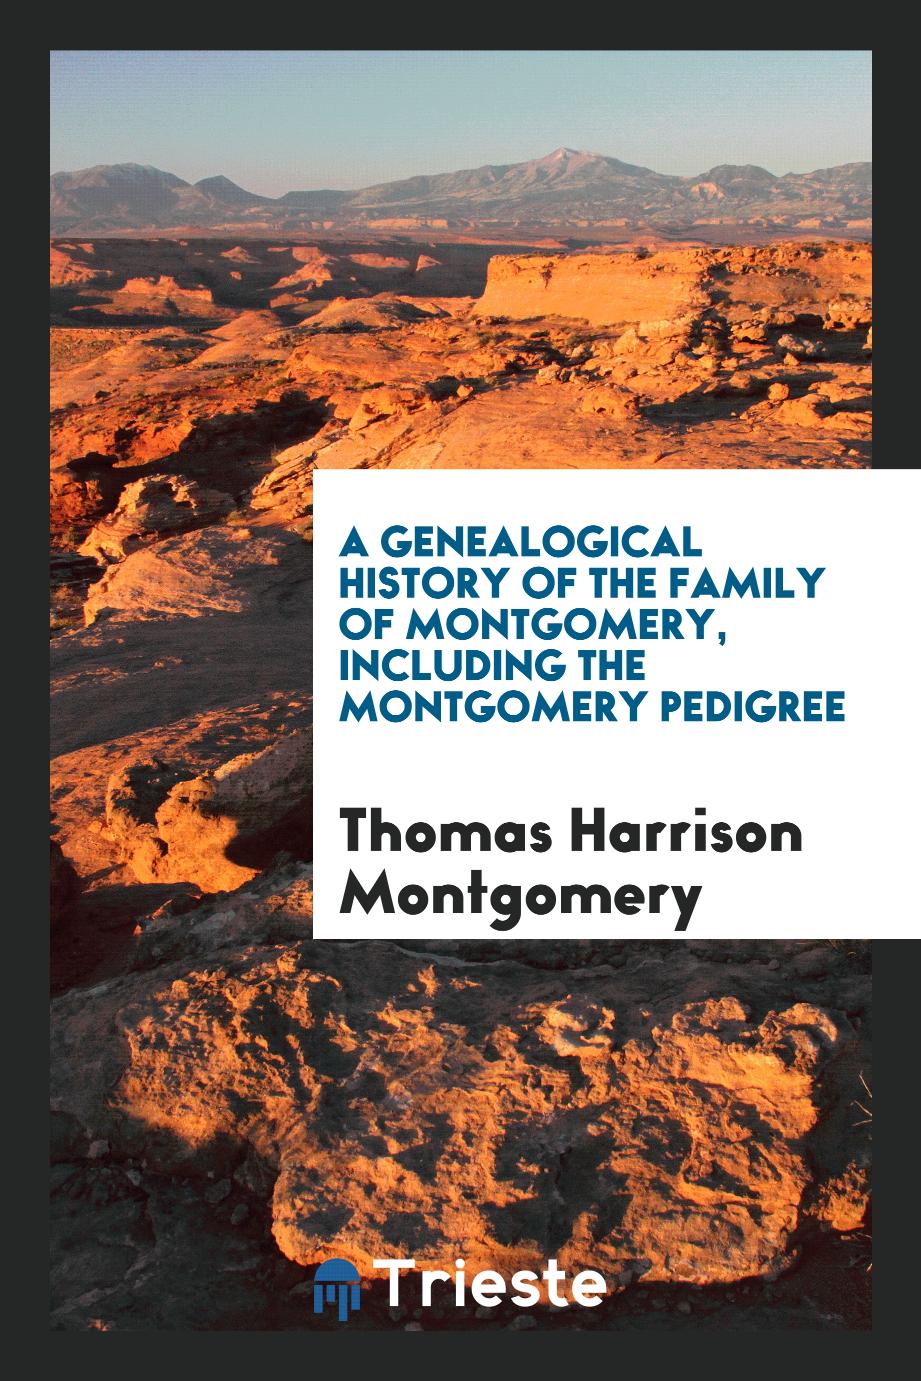 A Genealogical History of the Family of Montgomery, including the Montgomery Pedigree